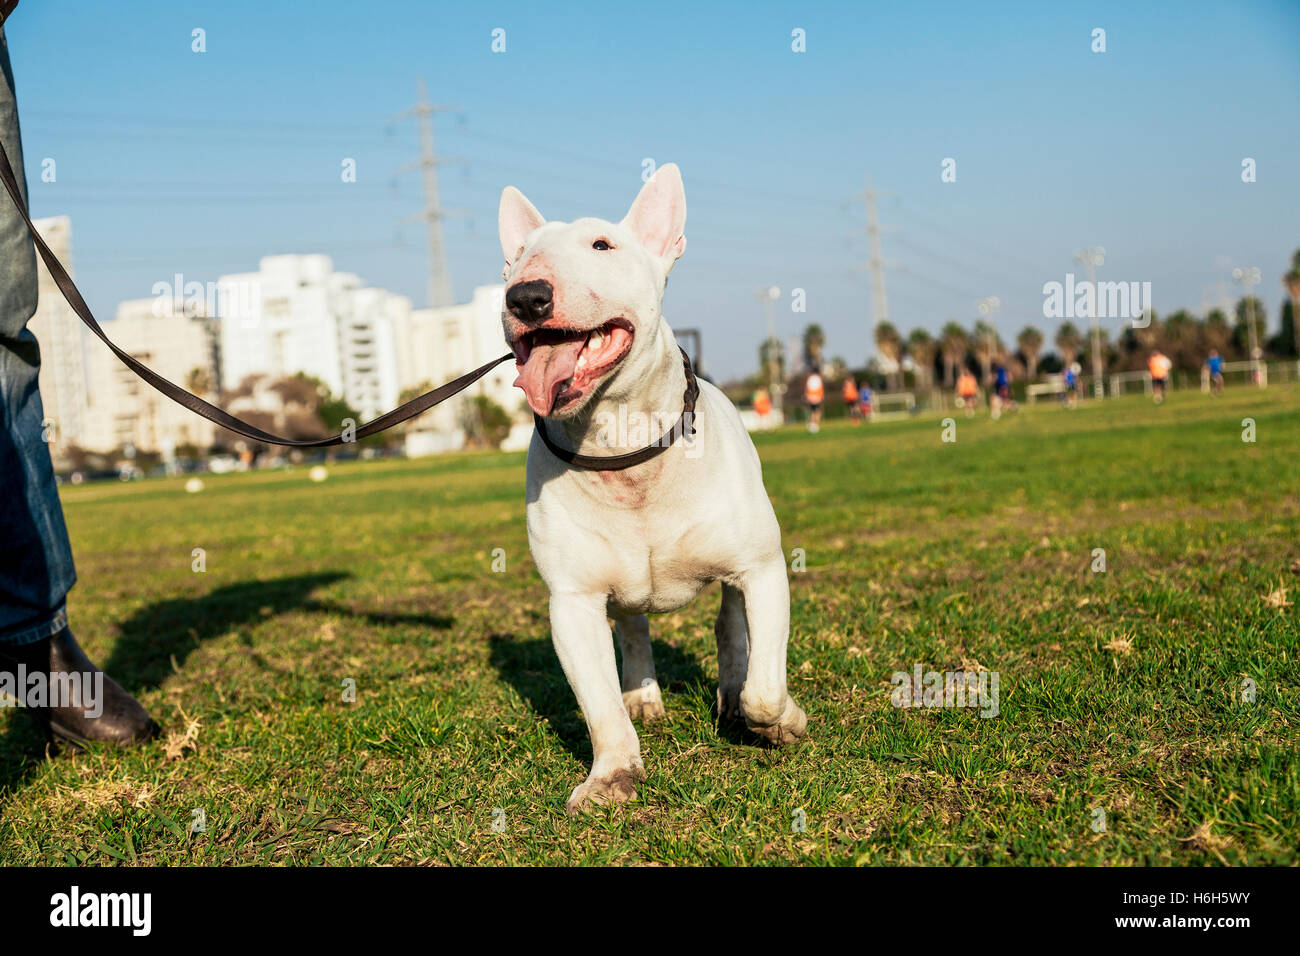 A happy Bull Terrier dog happy with its human on a sunny day at the park. Stock Photo